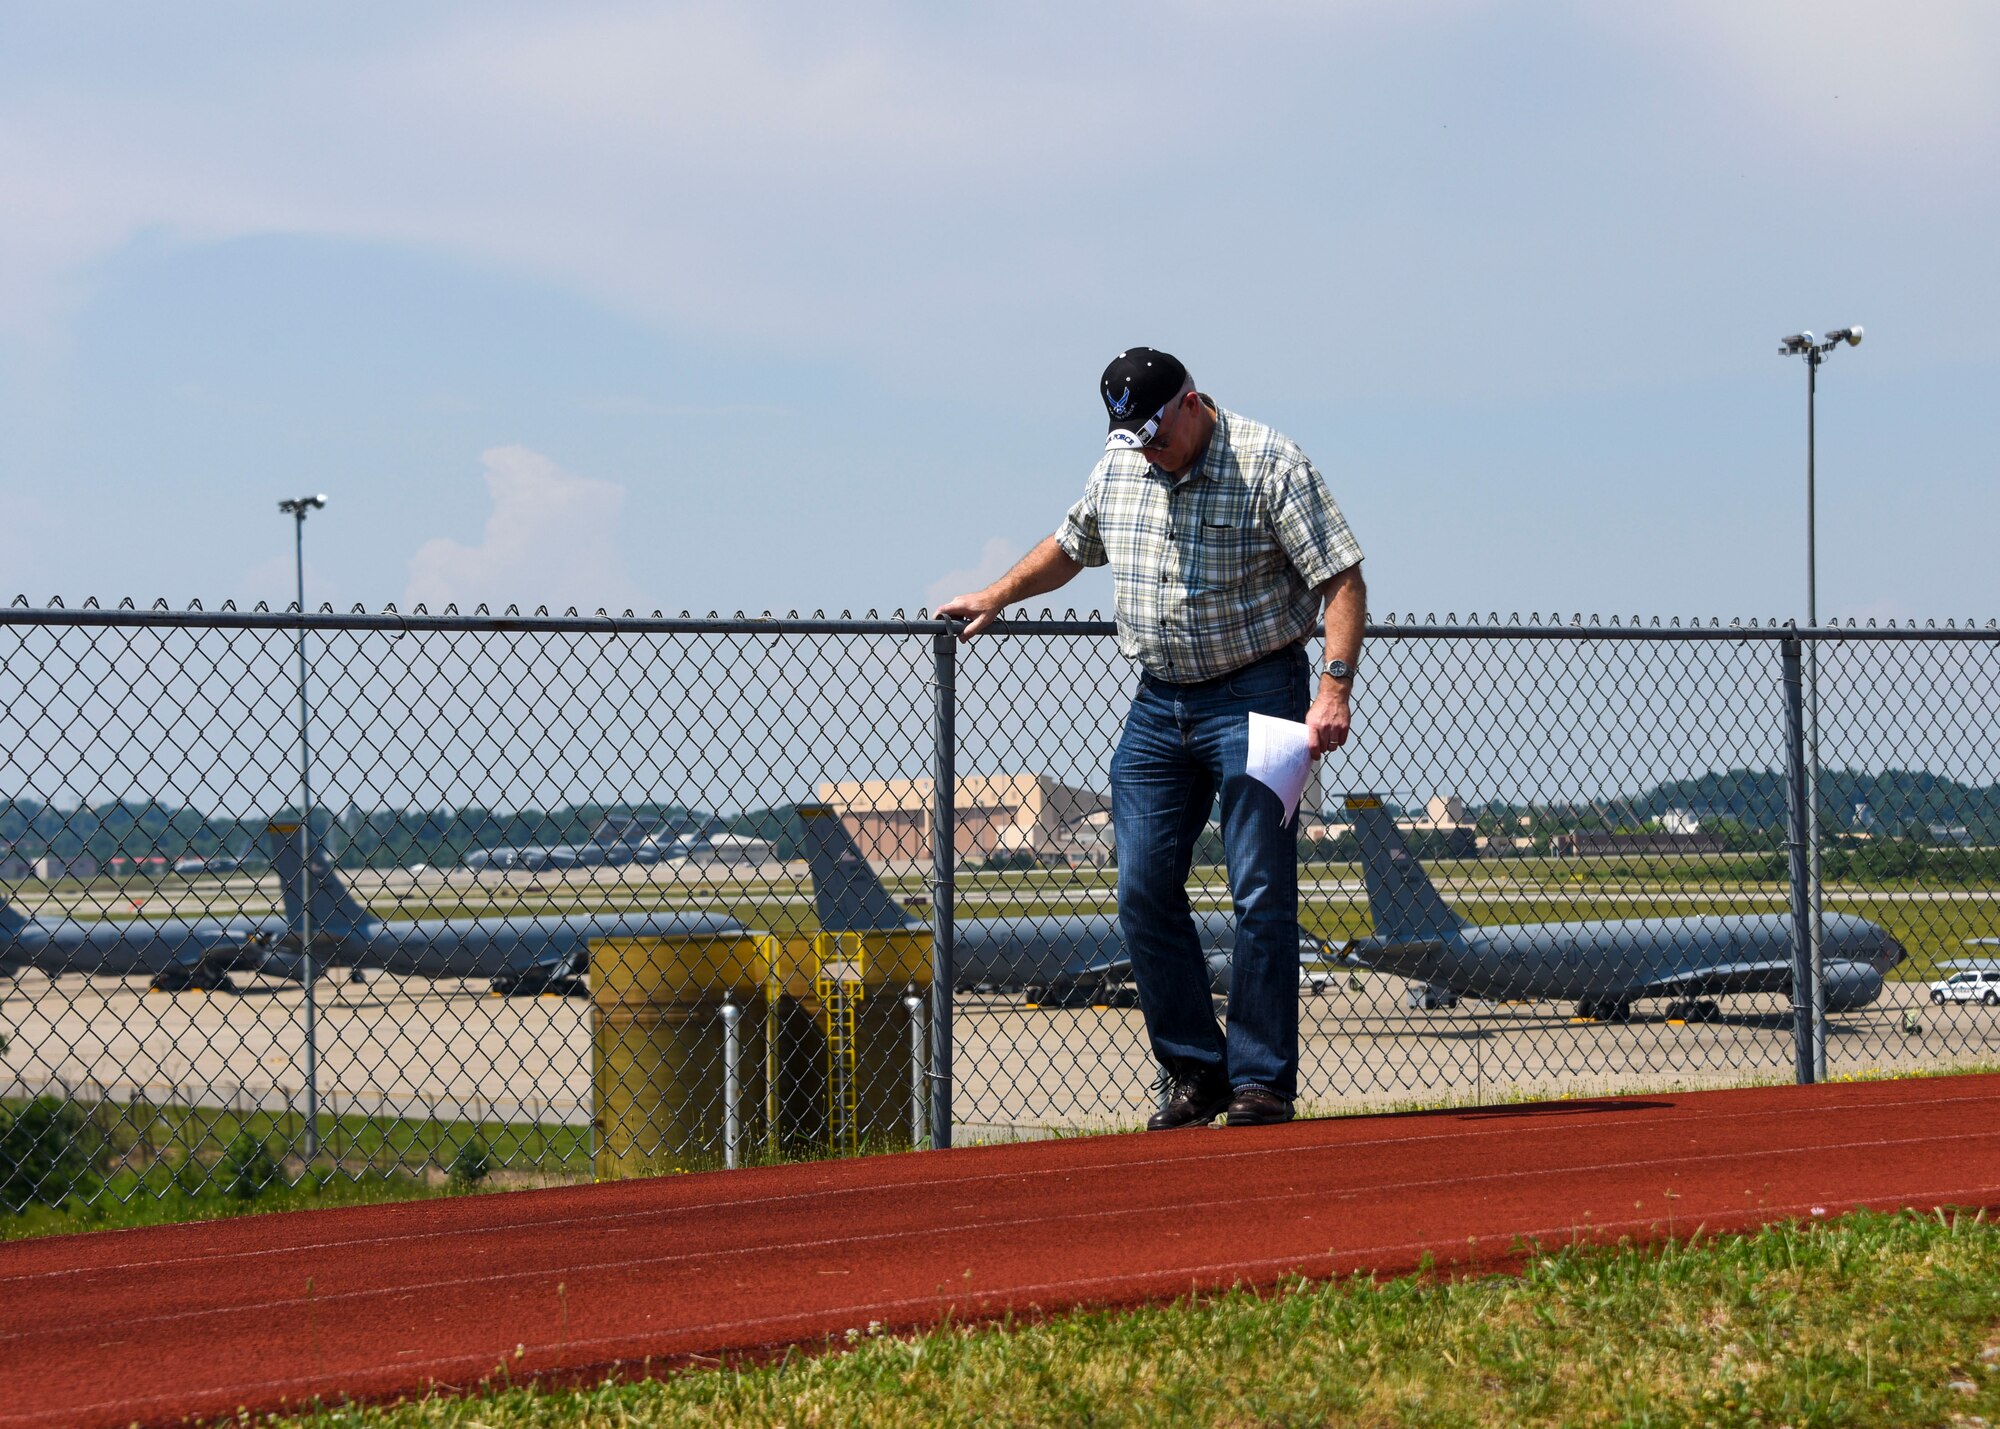 David Sparkman, Occupational Safety Manager, inspects the track at the 171st Air Refueling Wing July 9, 2020, Pittsburgh, Pa. Sparkman is looking for any issues with the track that would be a safety violation. (U.S. Air National Guard photo by Senior Airman Zoe M. Wockenfuss)